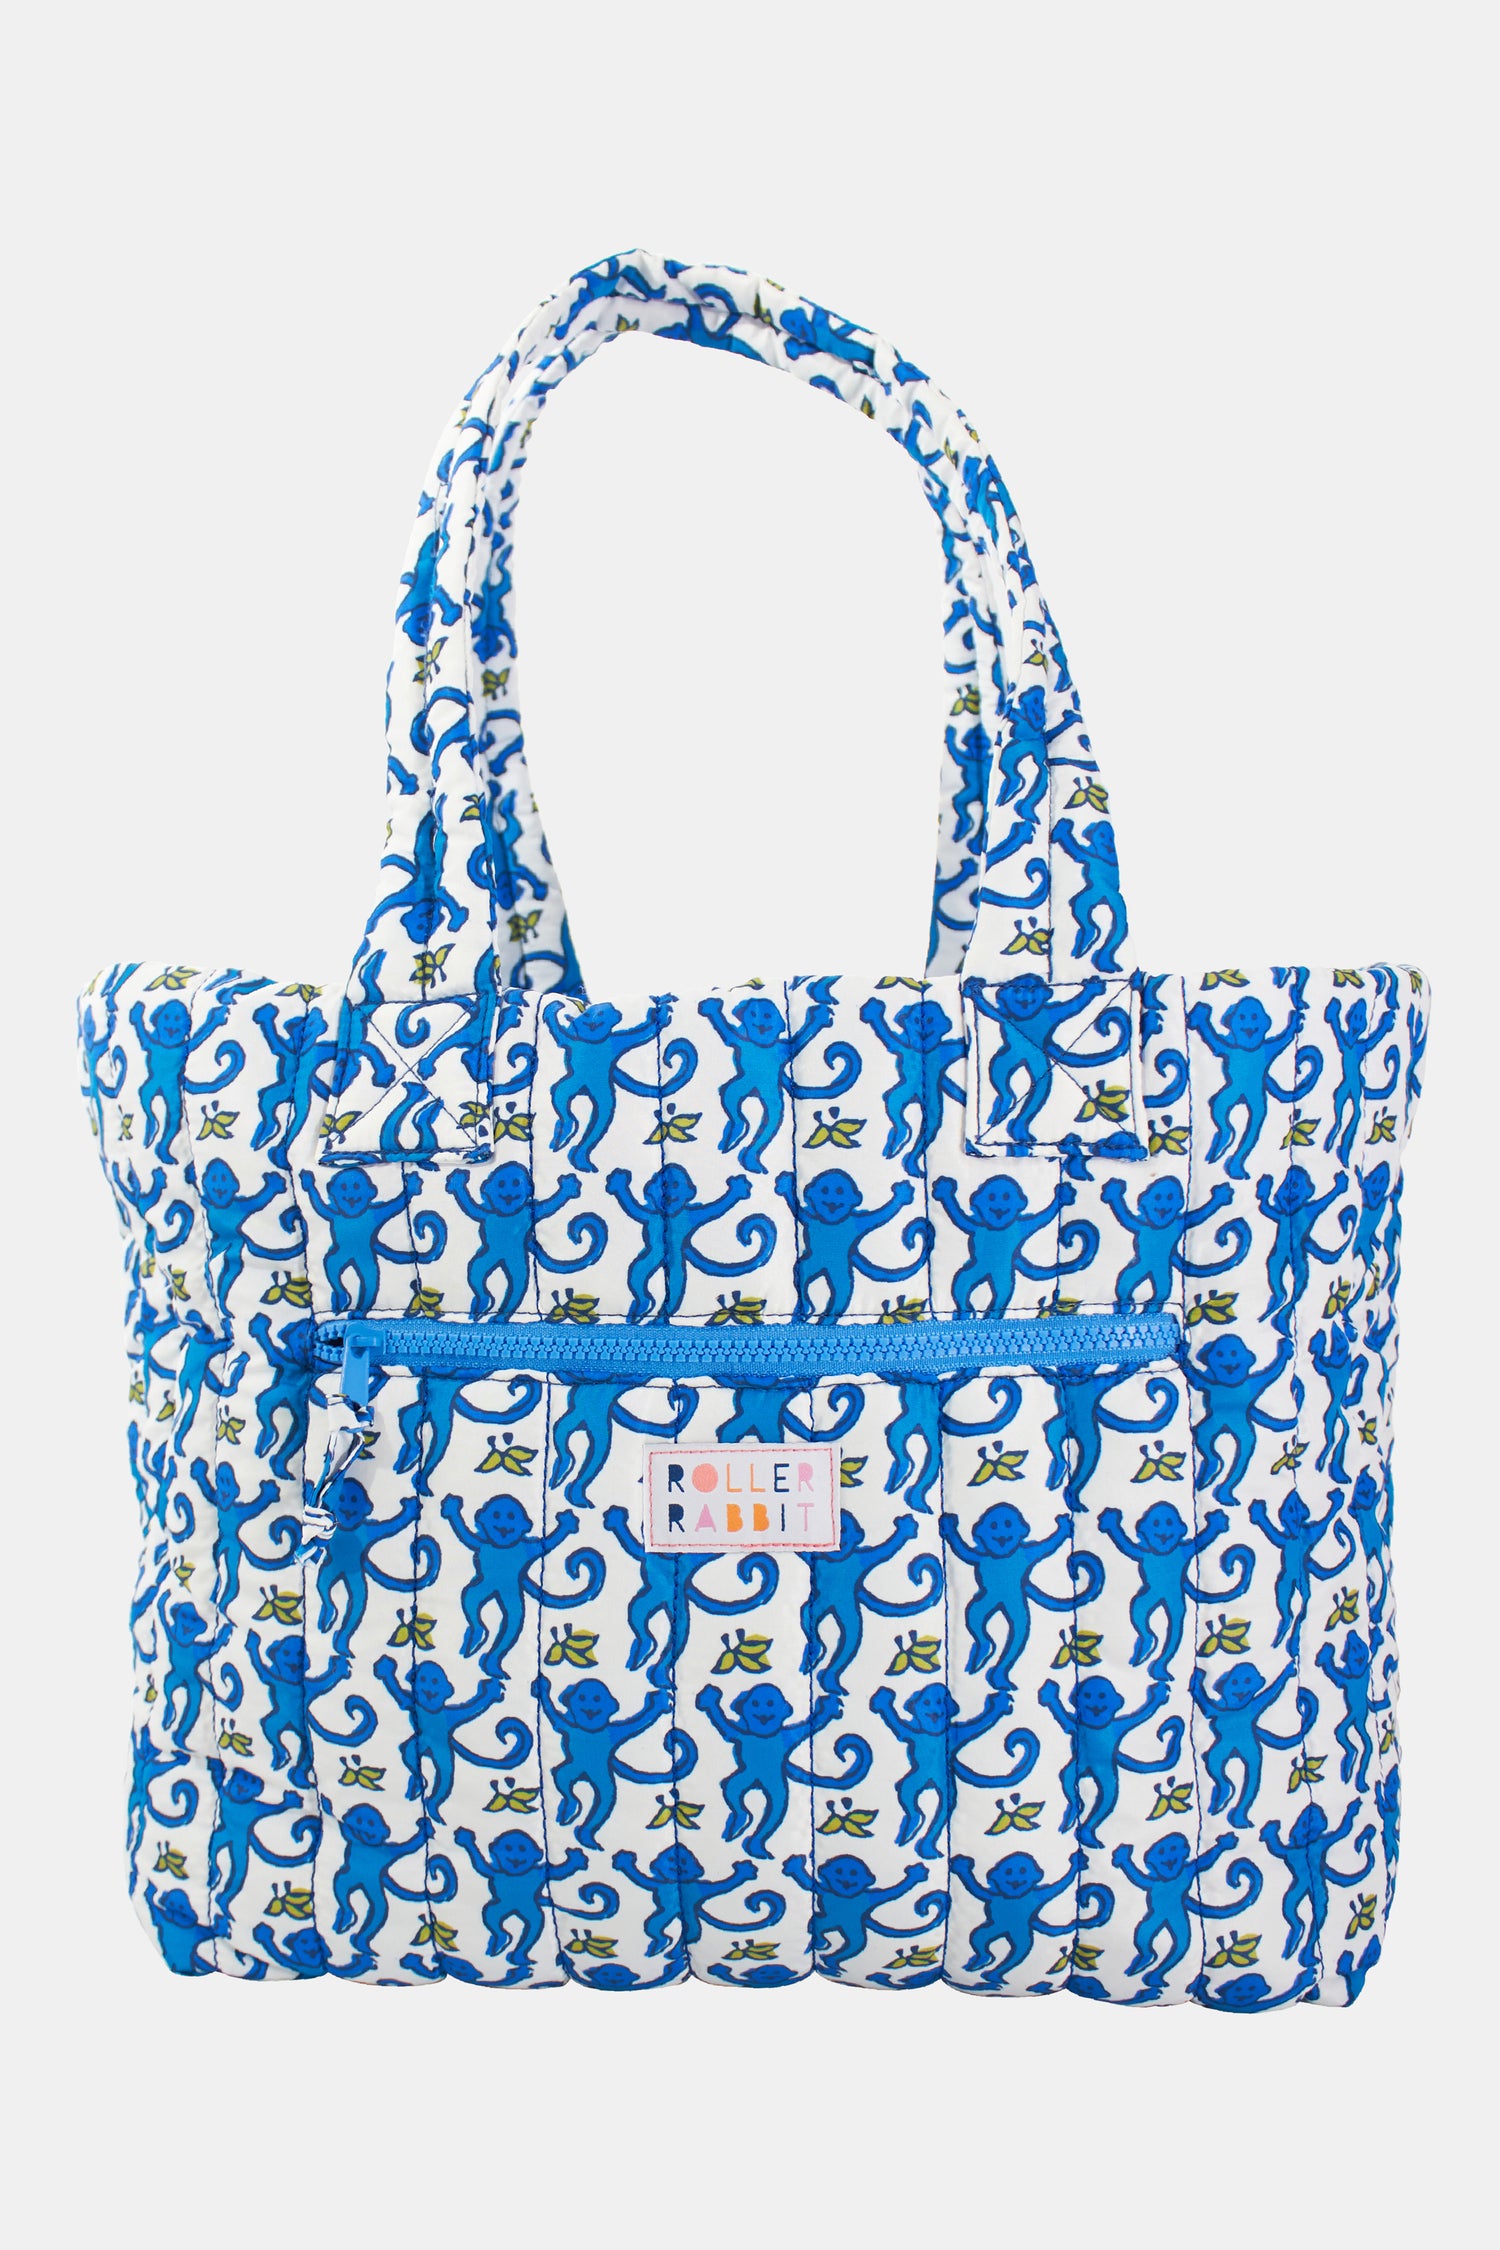 Roller Rabbit Monkey Large Quilted Tote